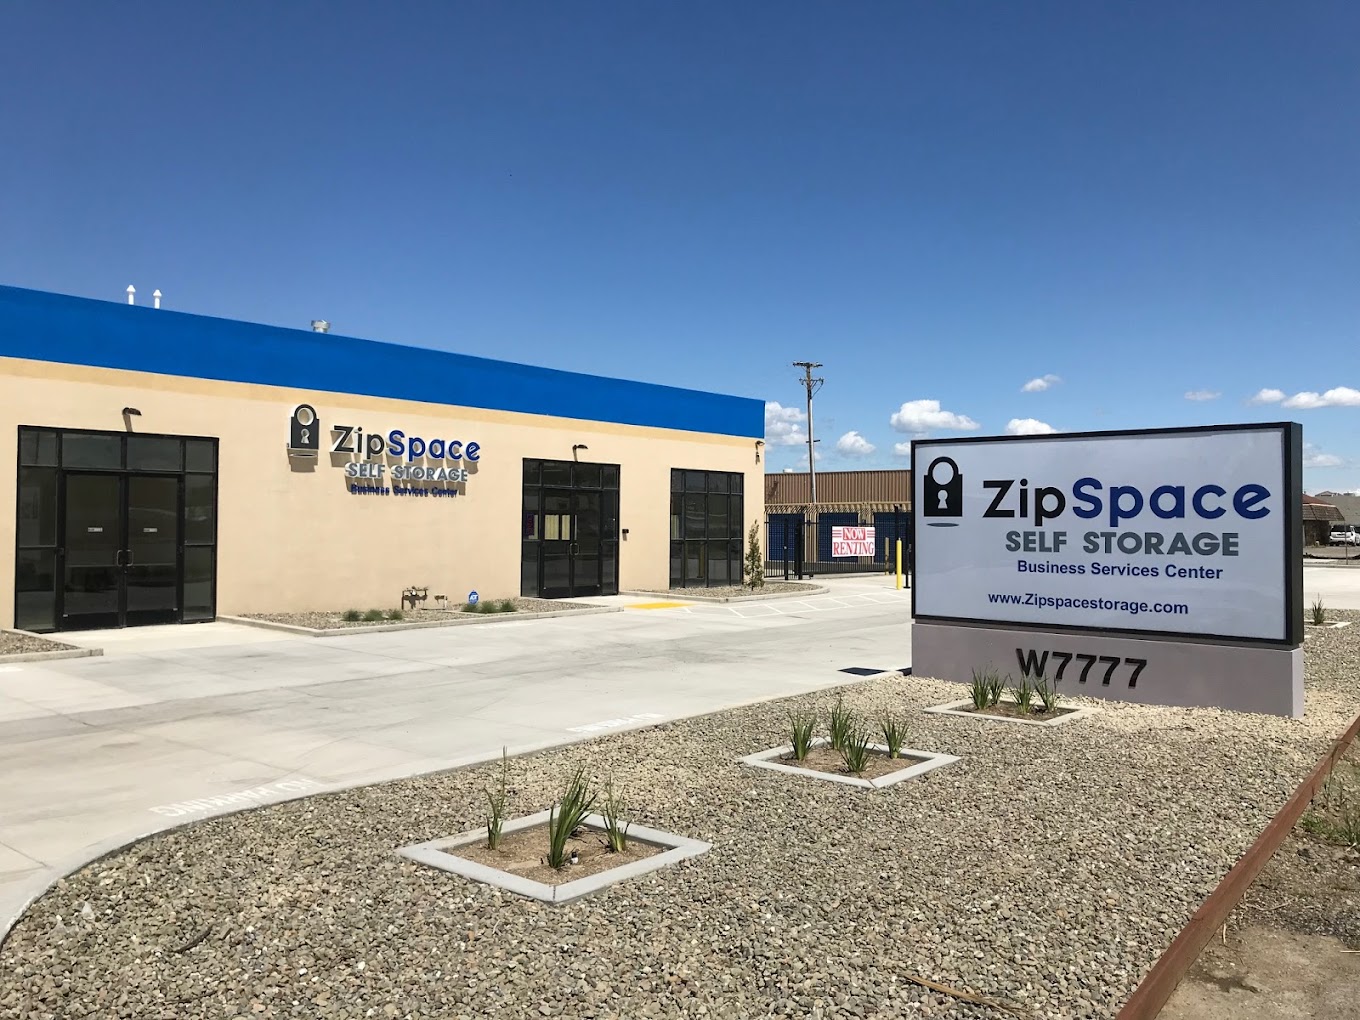 ZipSpace Storage in Tracy, CA